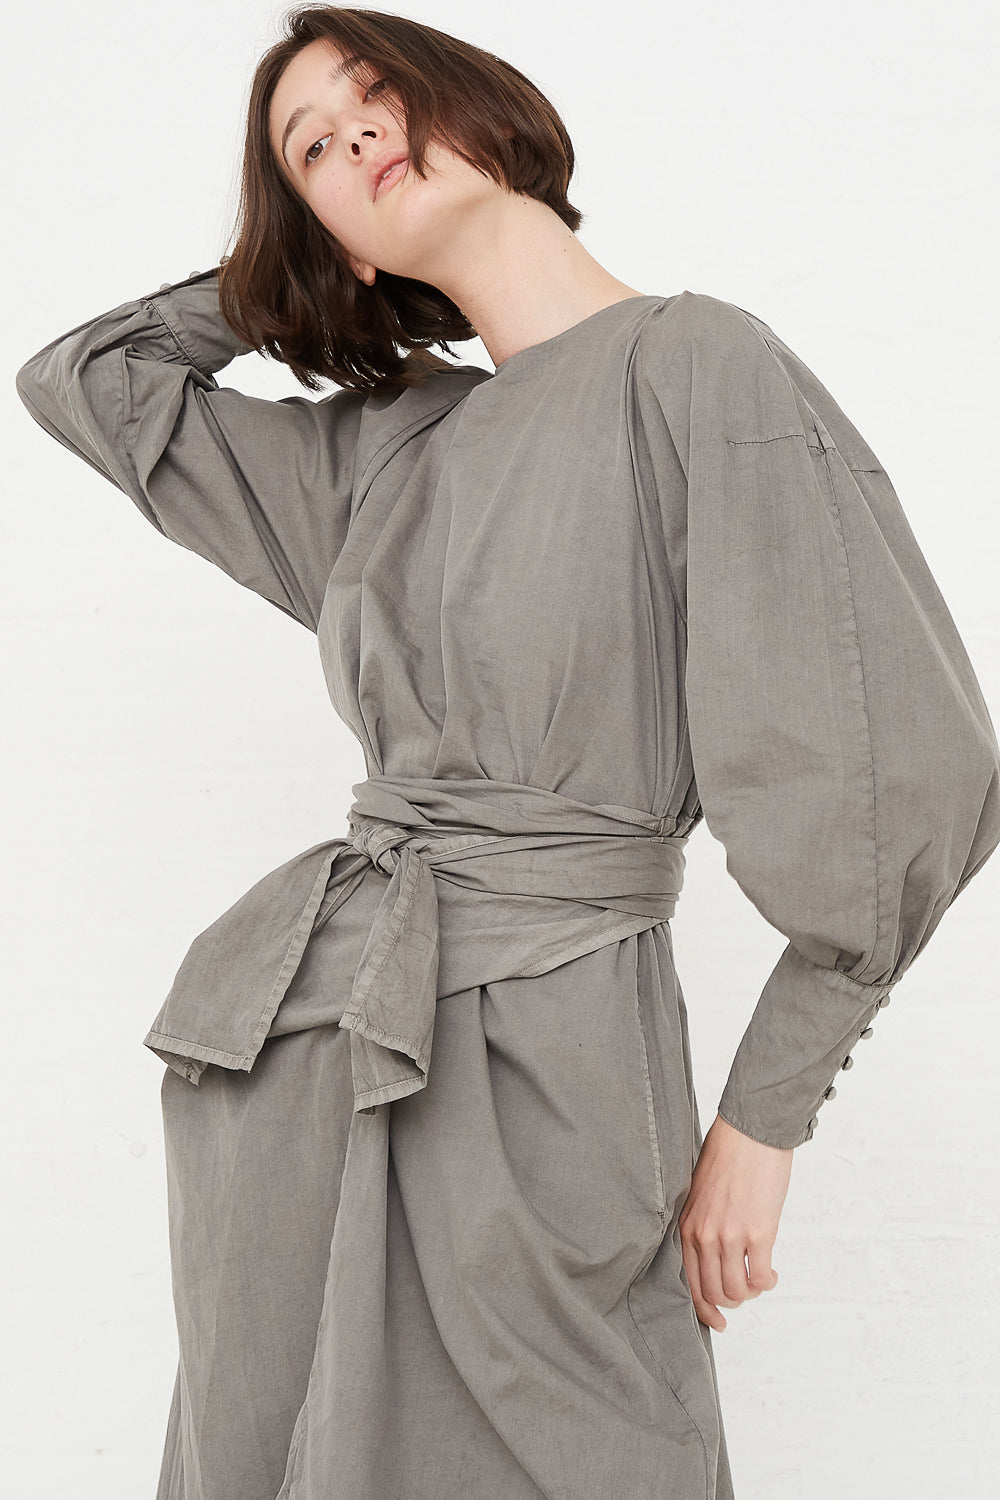 Cosmic Wonder - Suvin Cotton Broadcloth Wrapped Dress in Sumi front detail